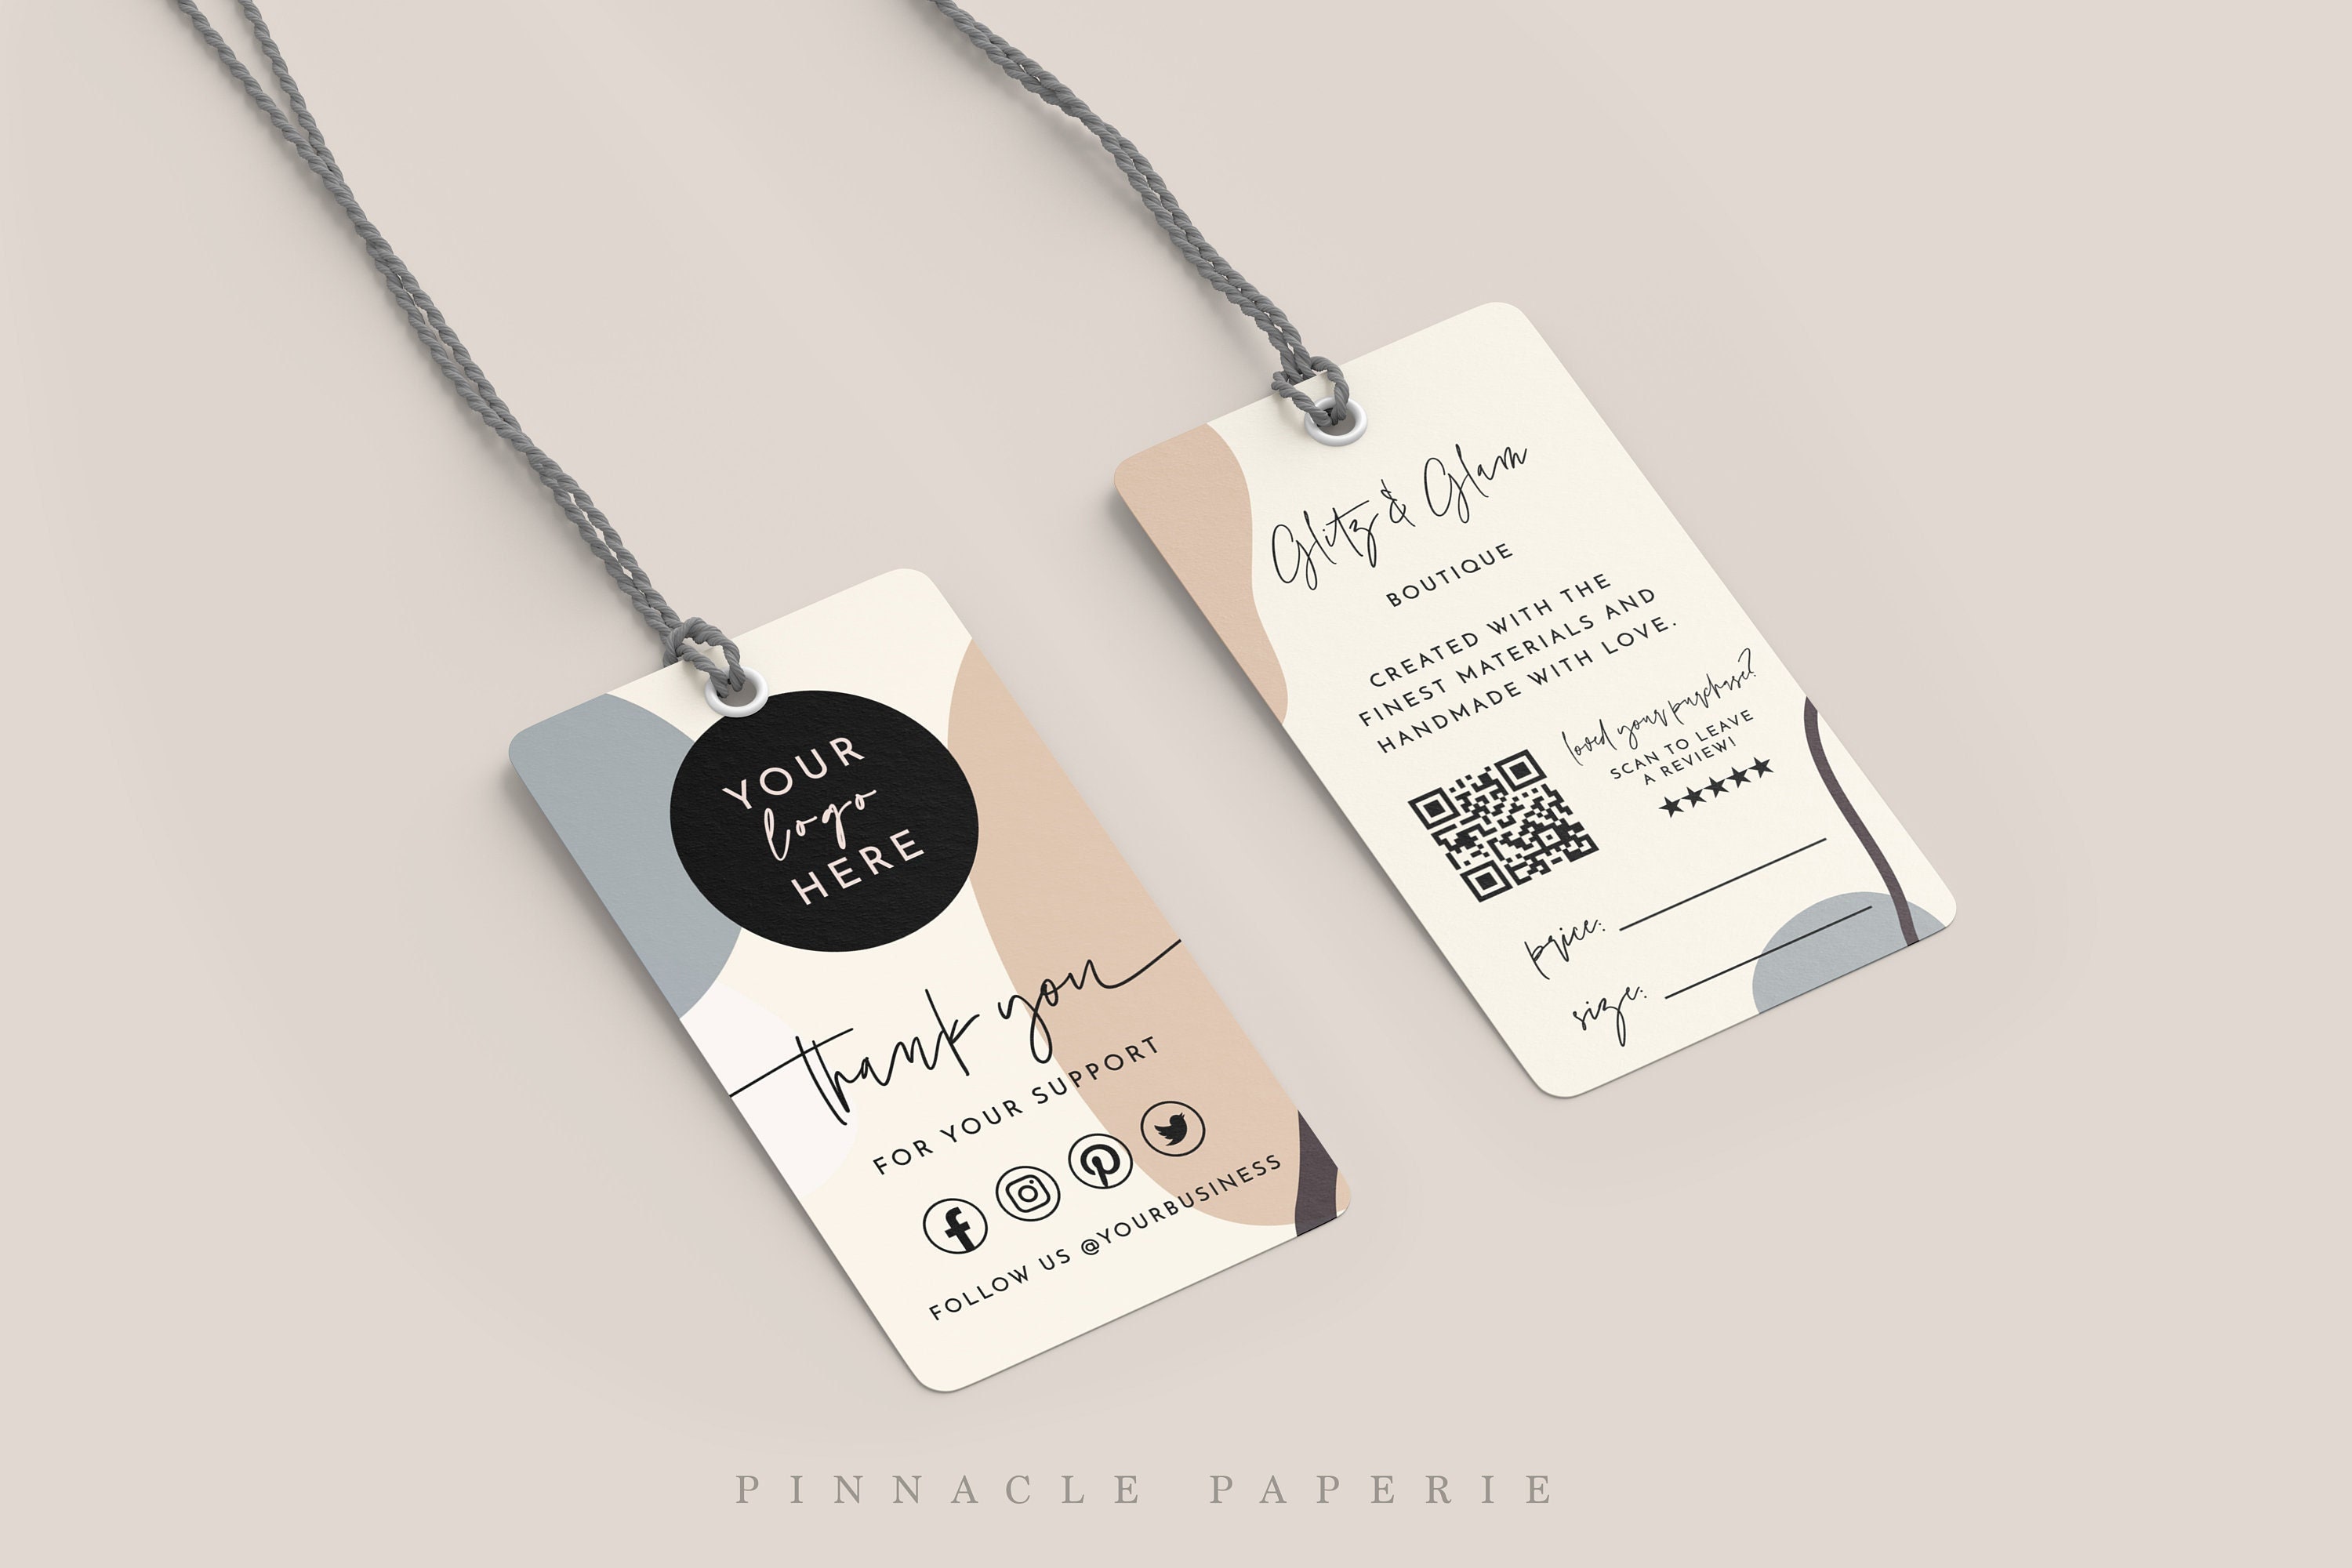 Product Tags Design, Custom Textile Tags, Care Instructions, Custom Hang  Tags, Product Label, Business Tags, Custom Clothing Labels, Custom 